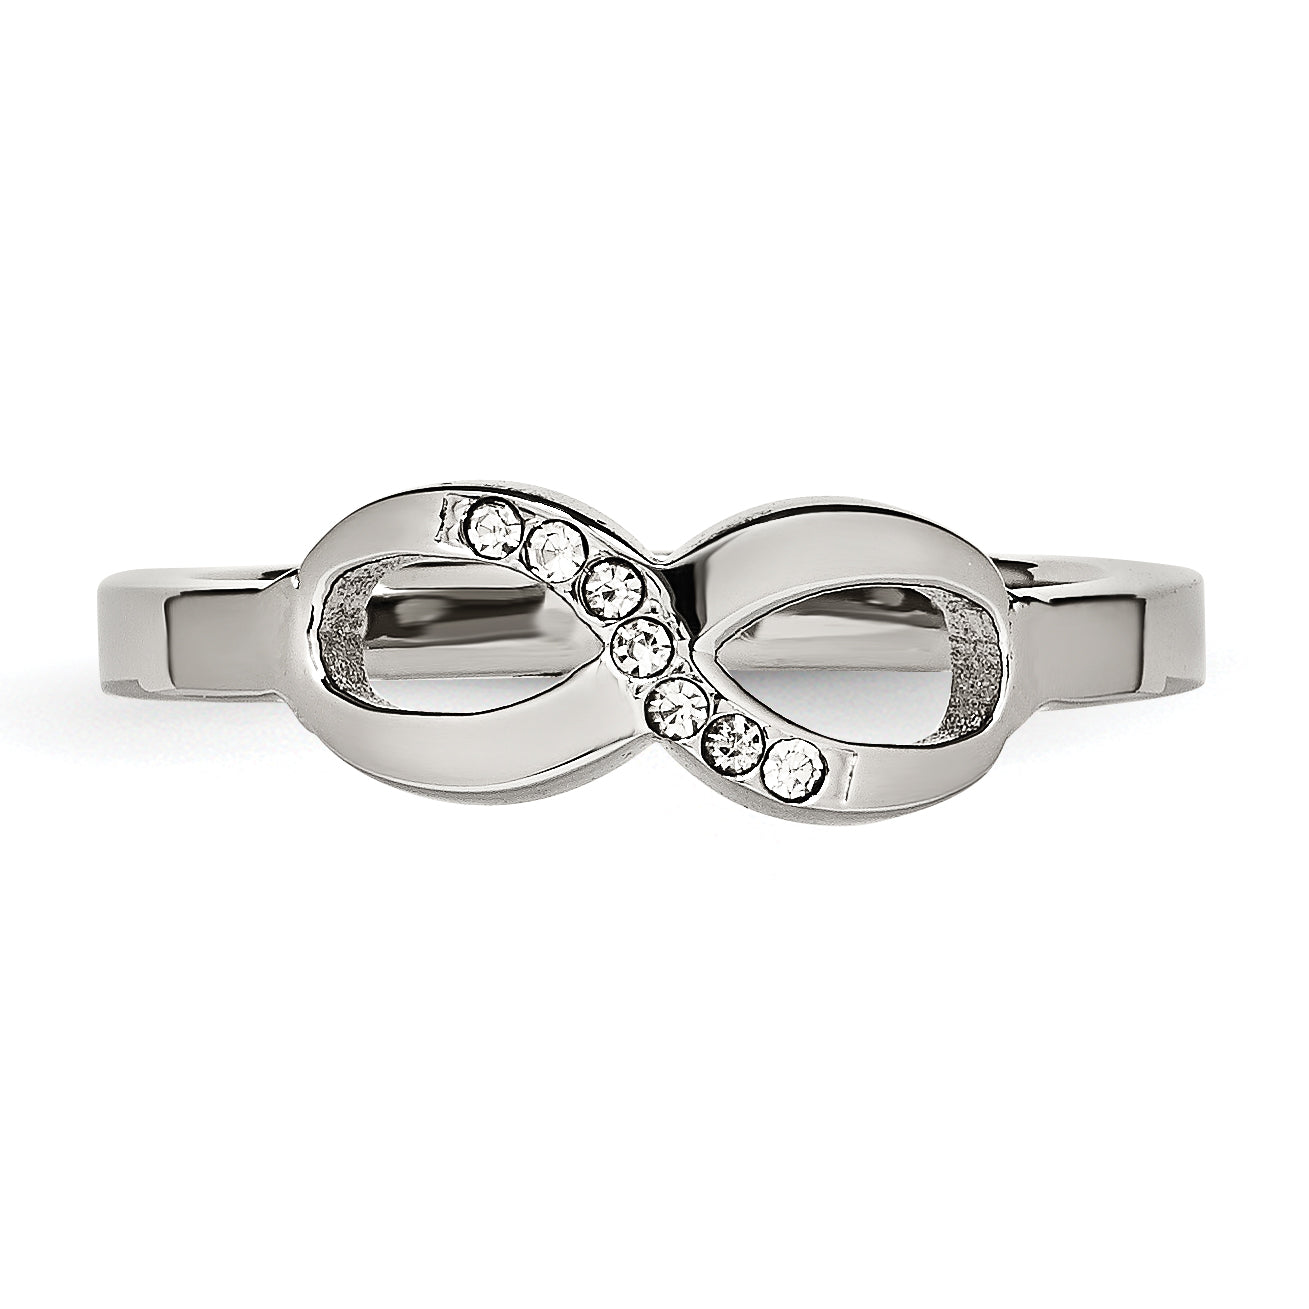 Stainless Steel Polished Infinity Symbol with CZ Ring